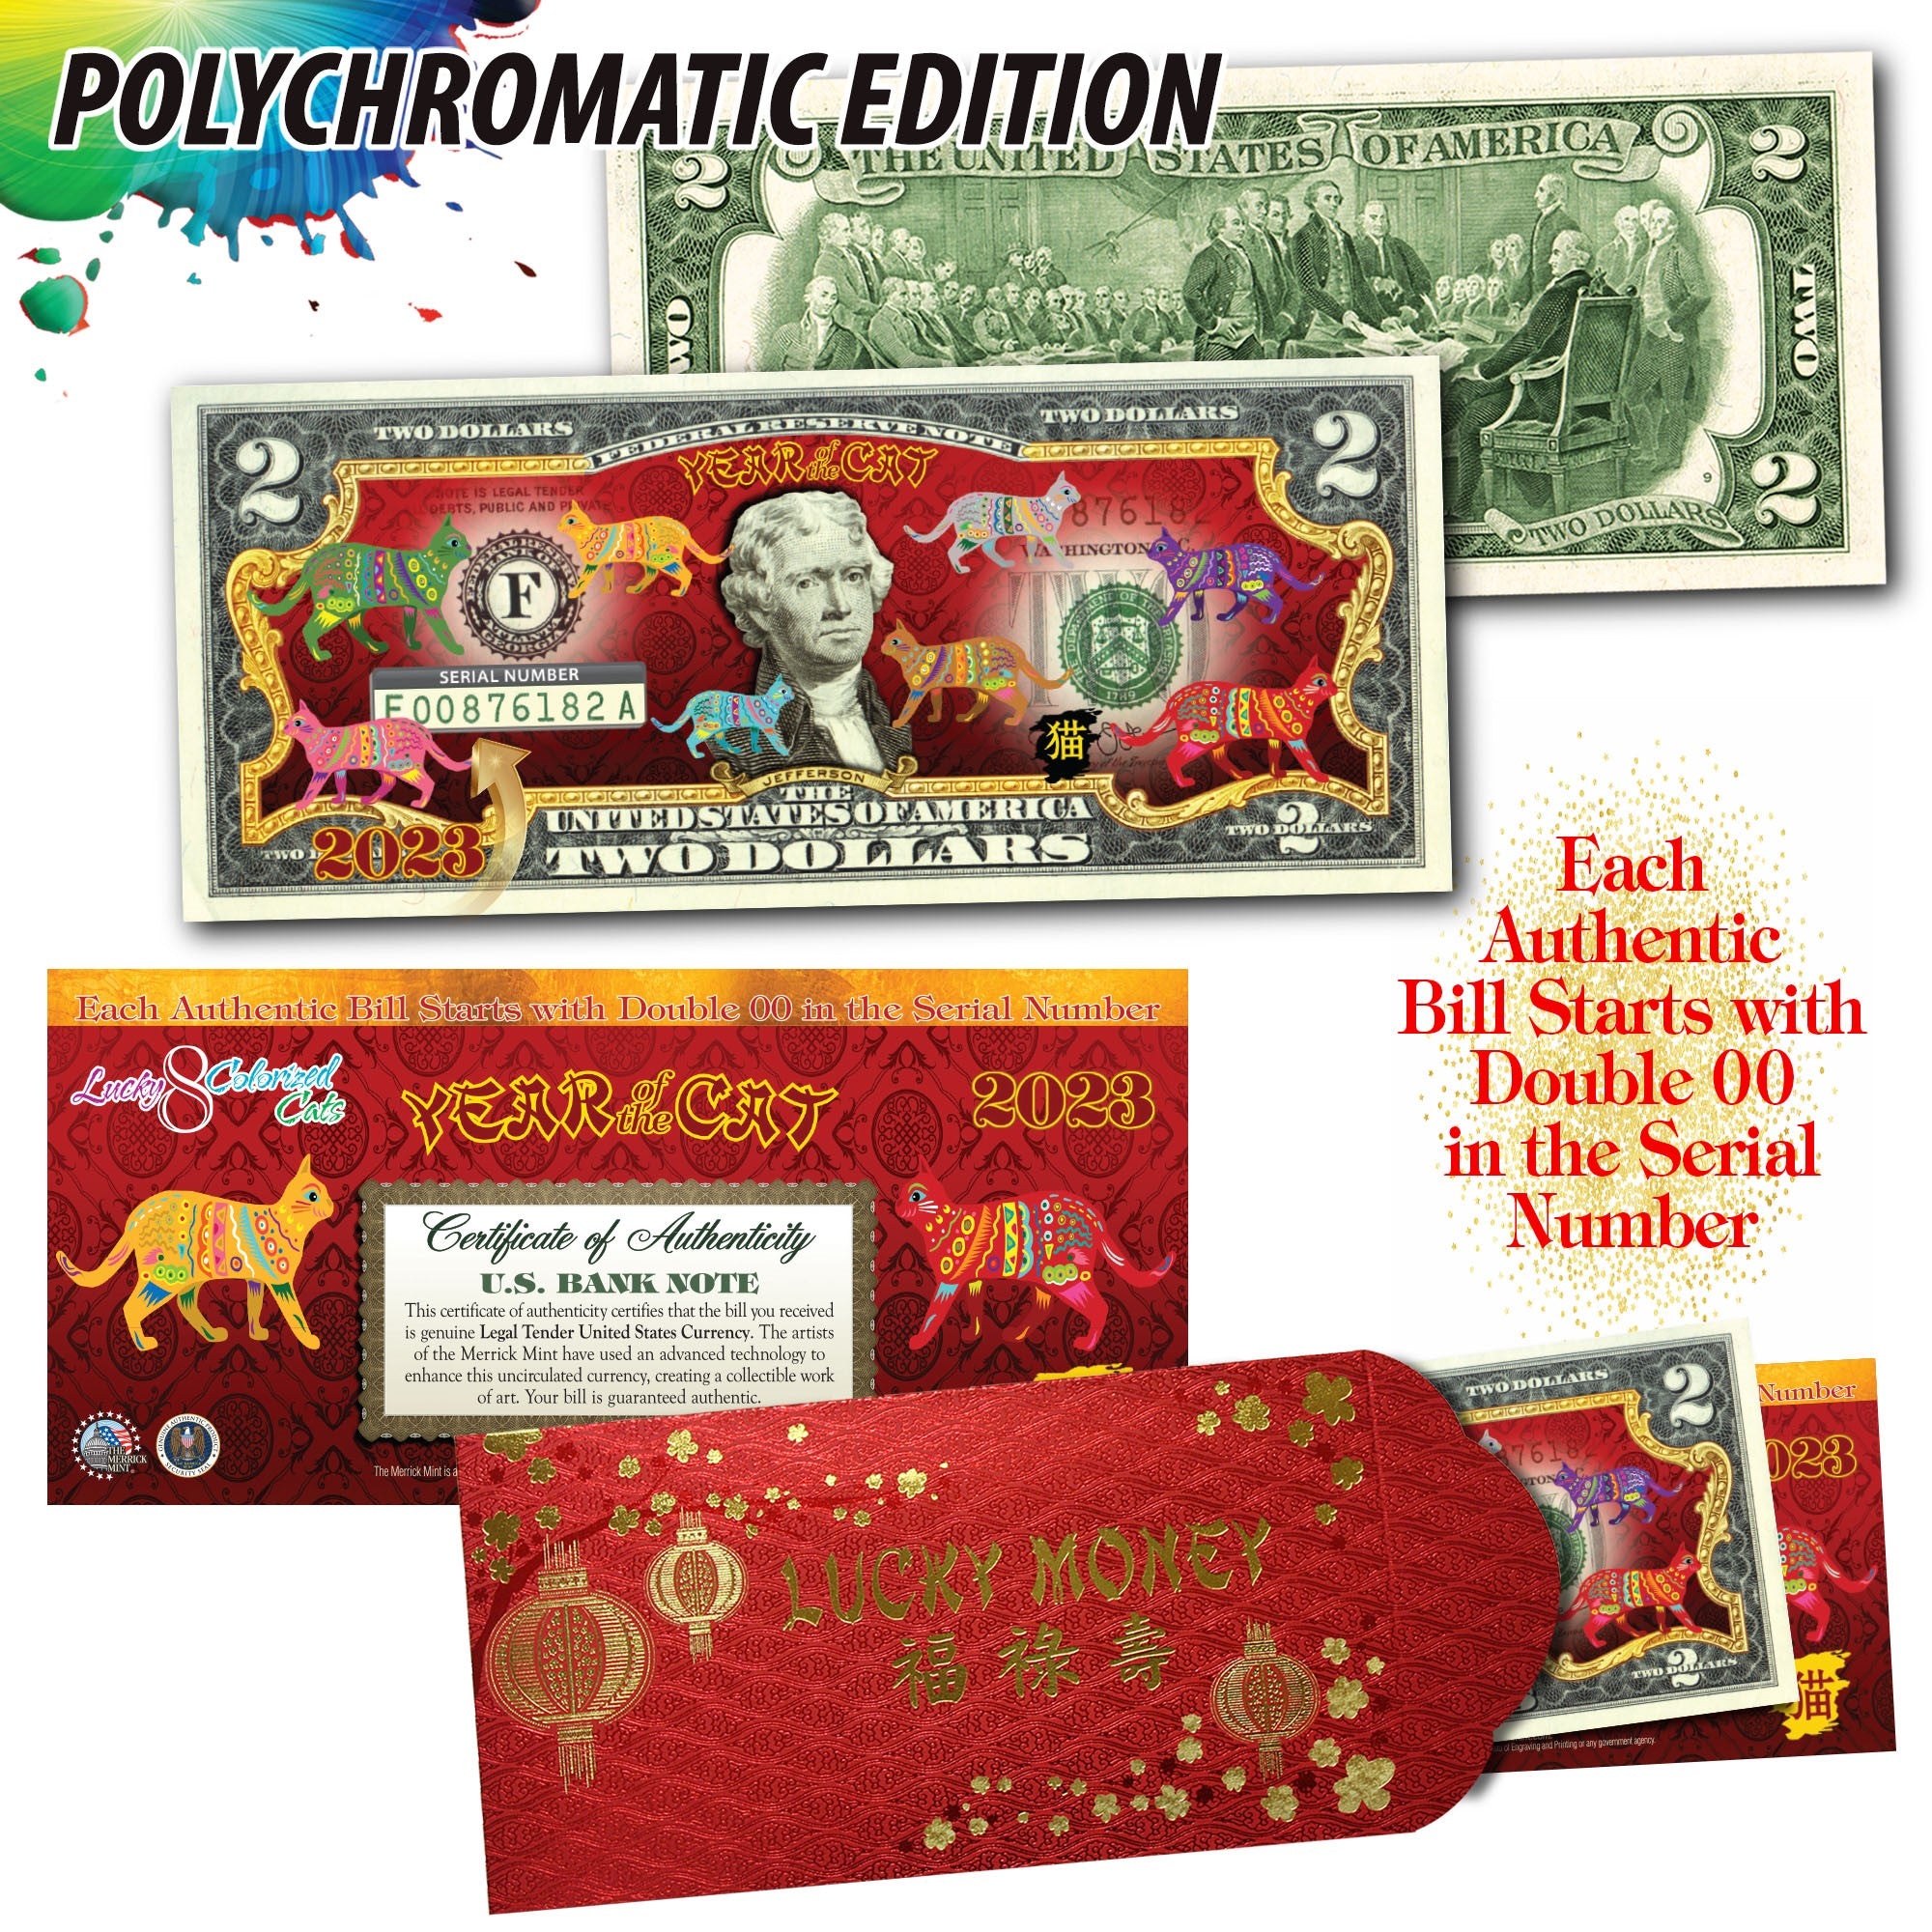 2023 Vietnamese Year of the Cat Red Envelope, personalized – HooHoo And  Mouse